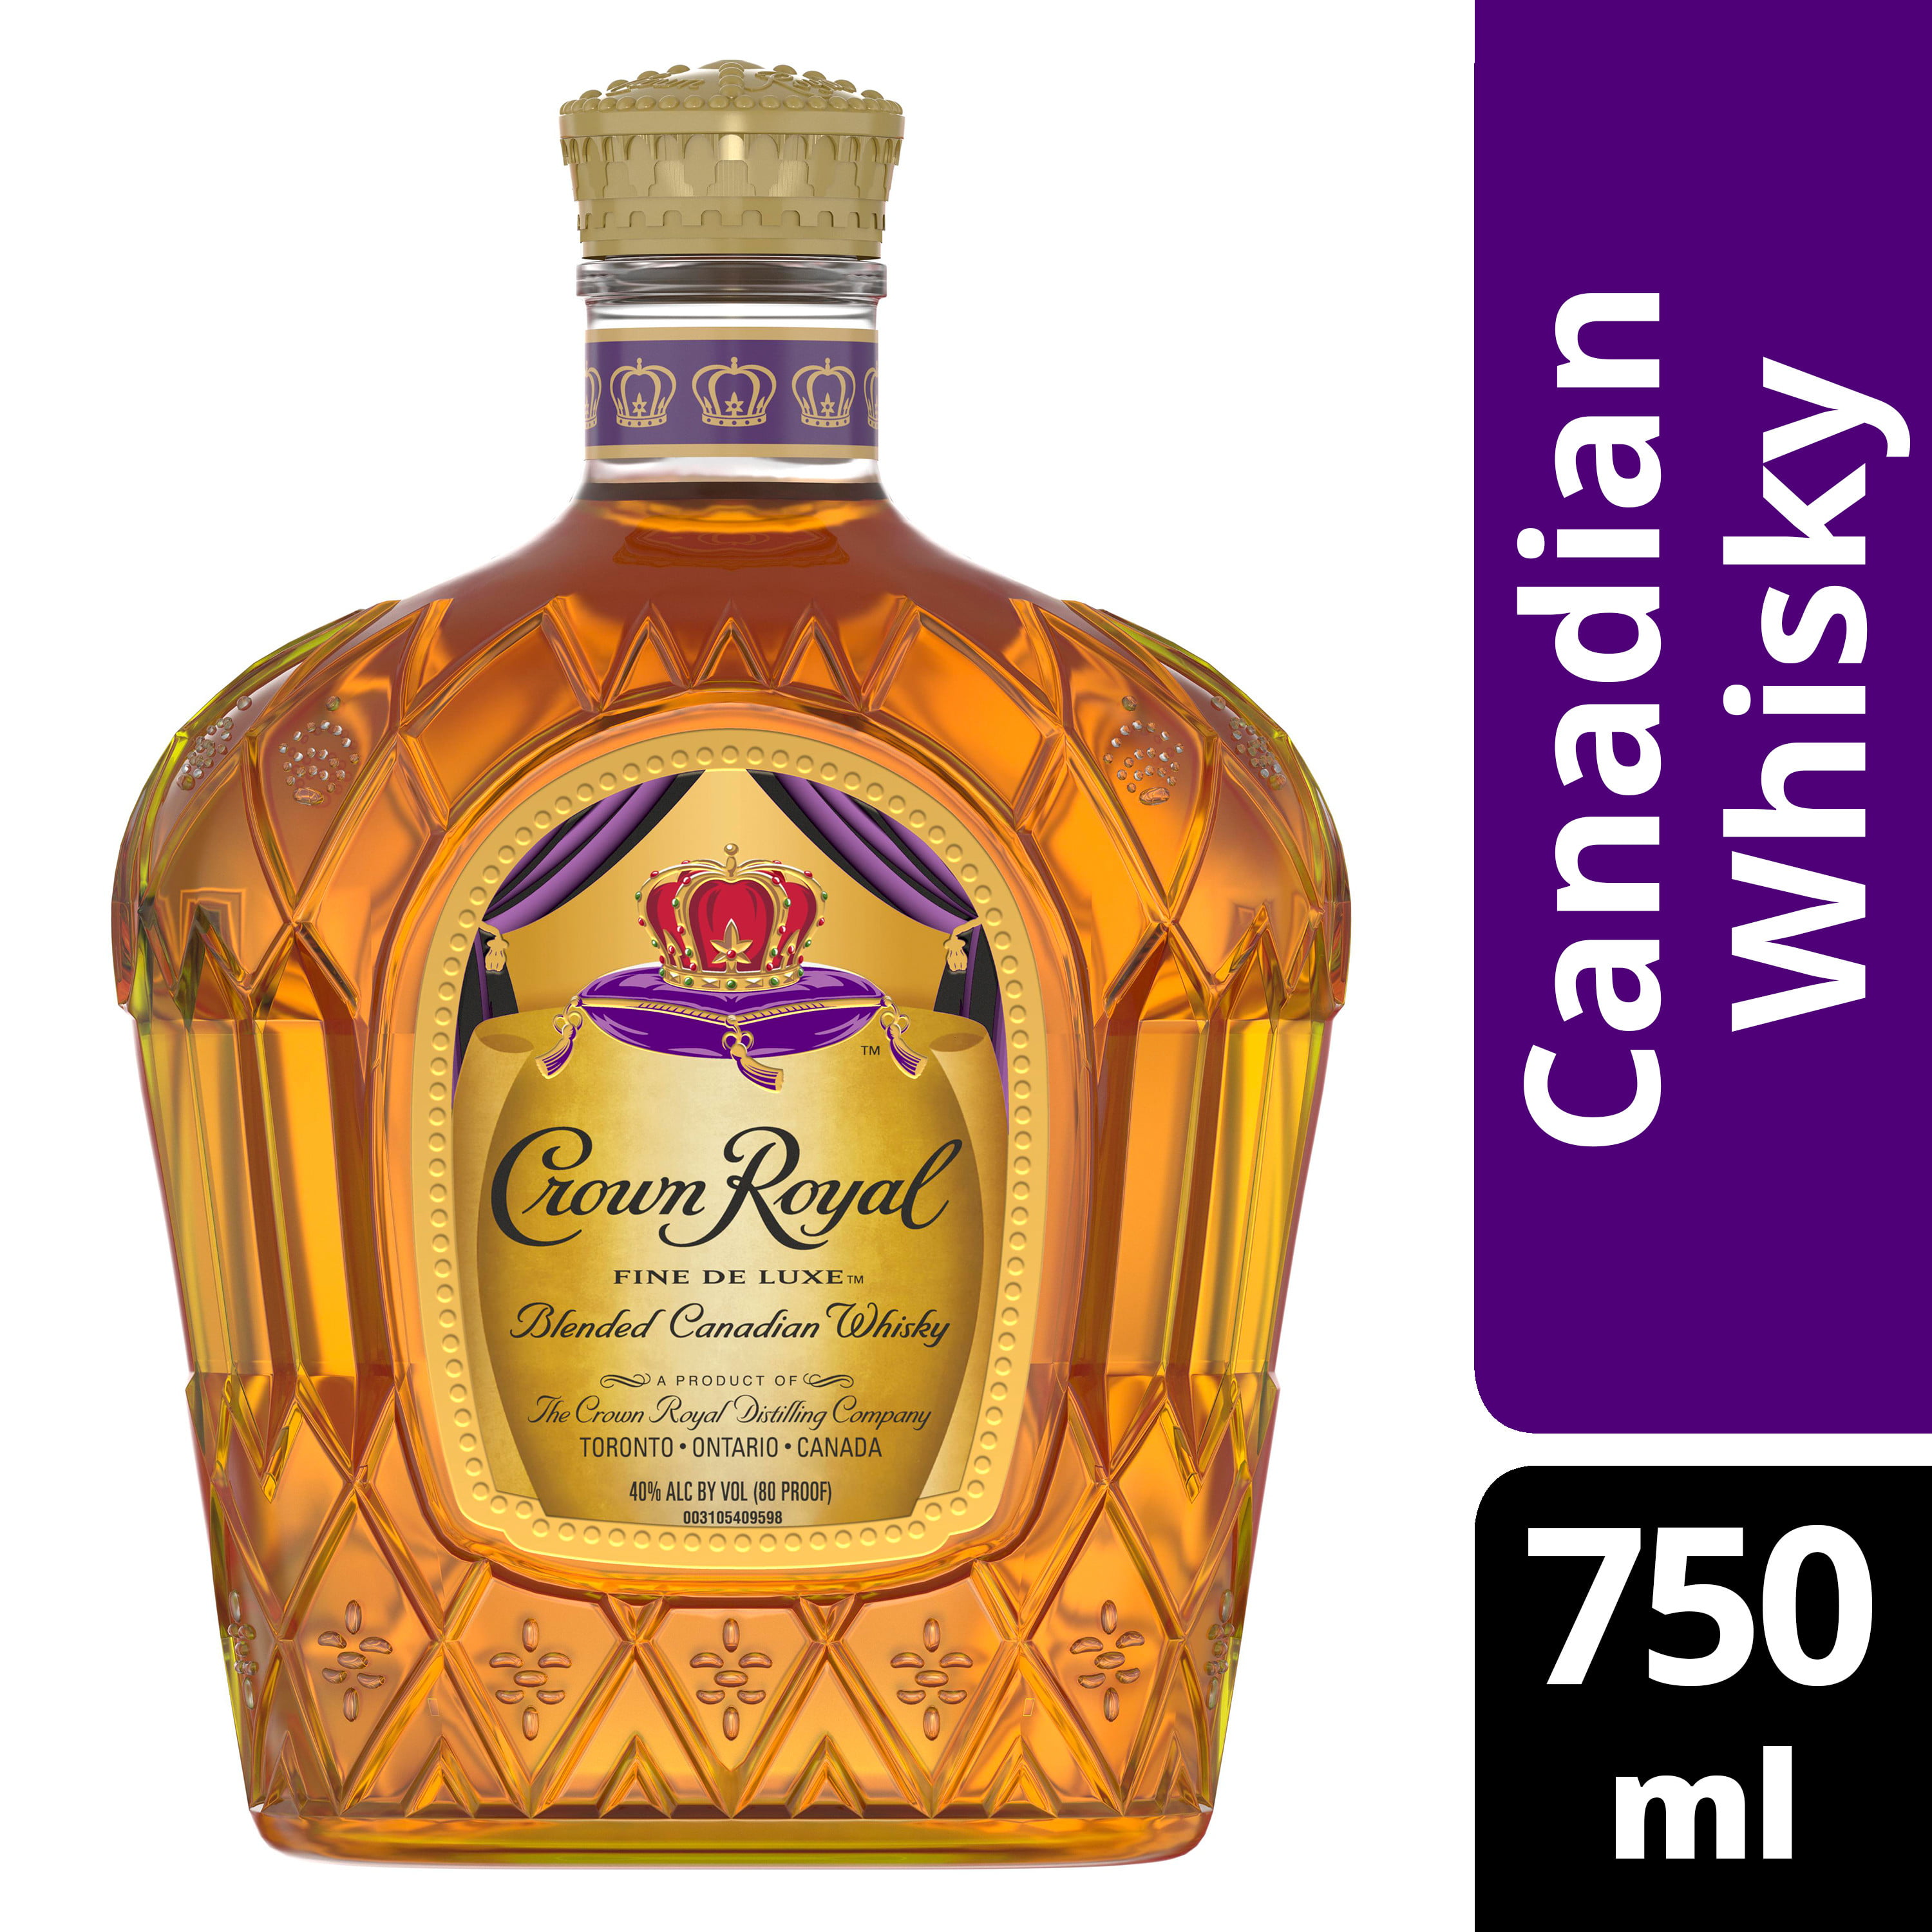 Crown Royal Price 750ml - How do you Price a Switches?